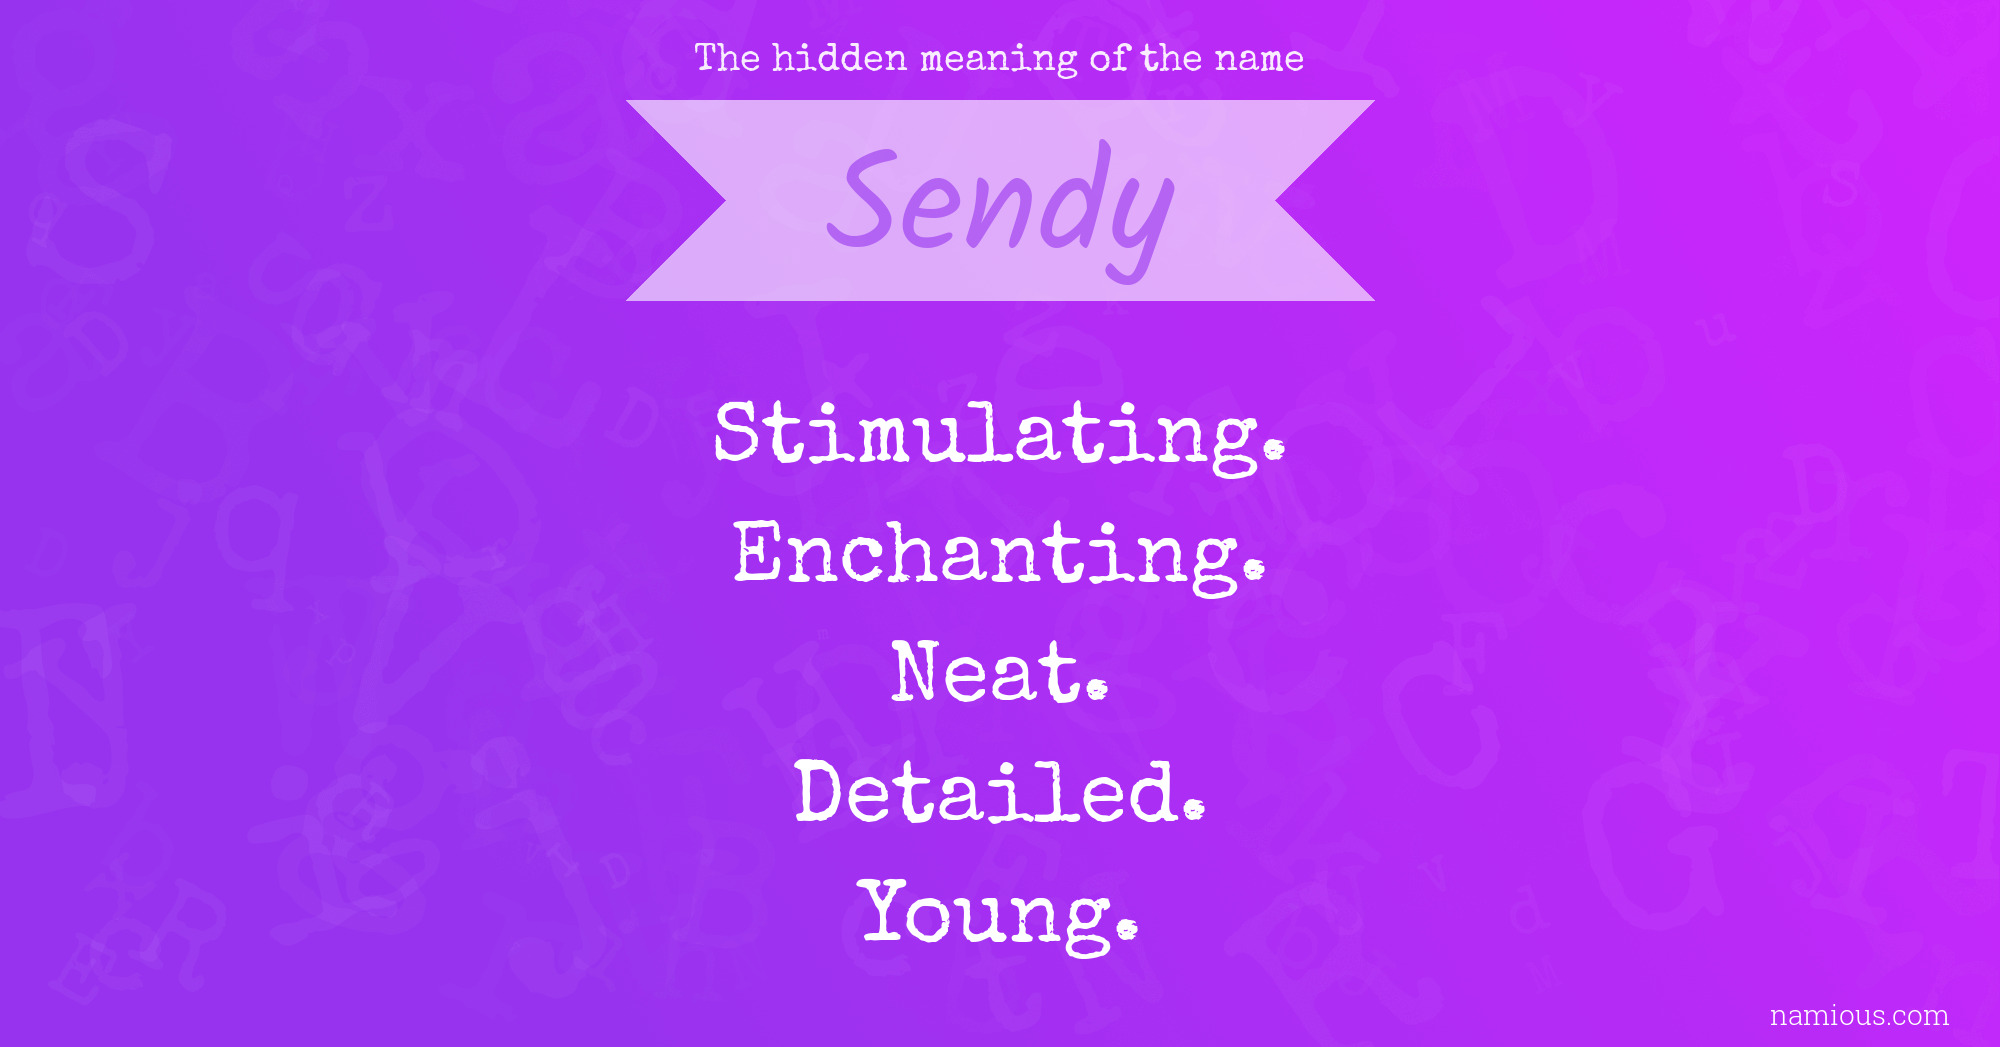 The hidden meaning of the name Sendy